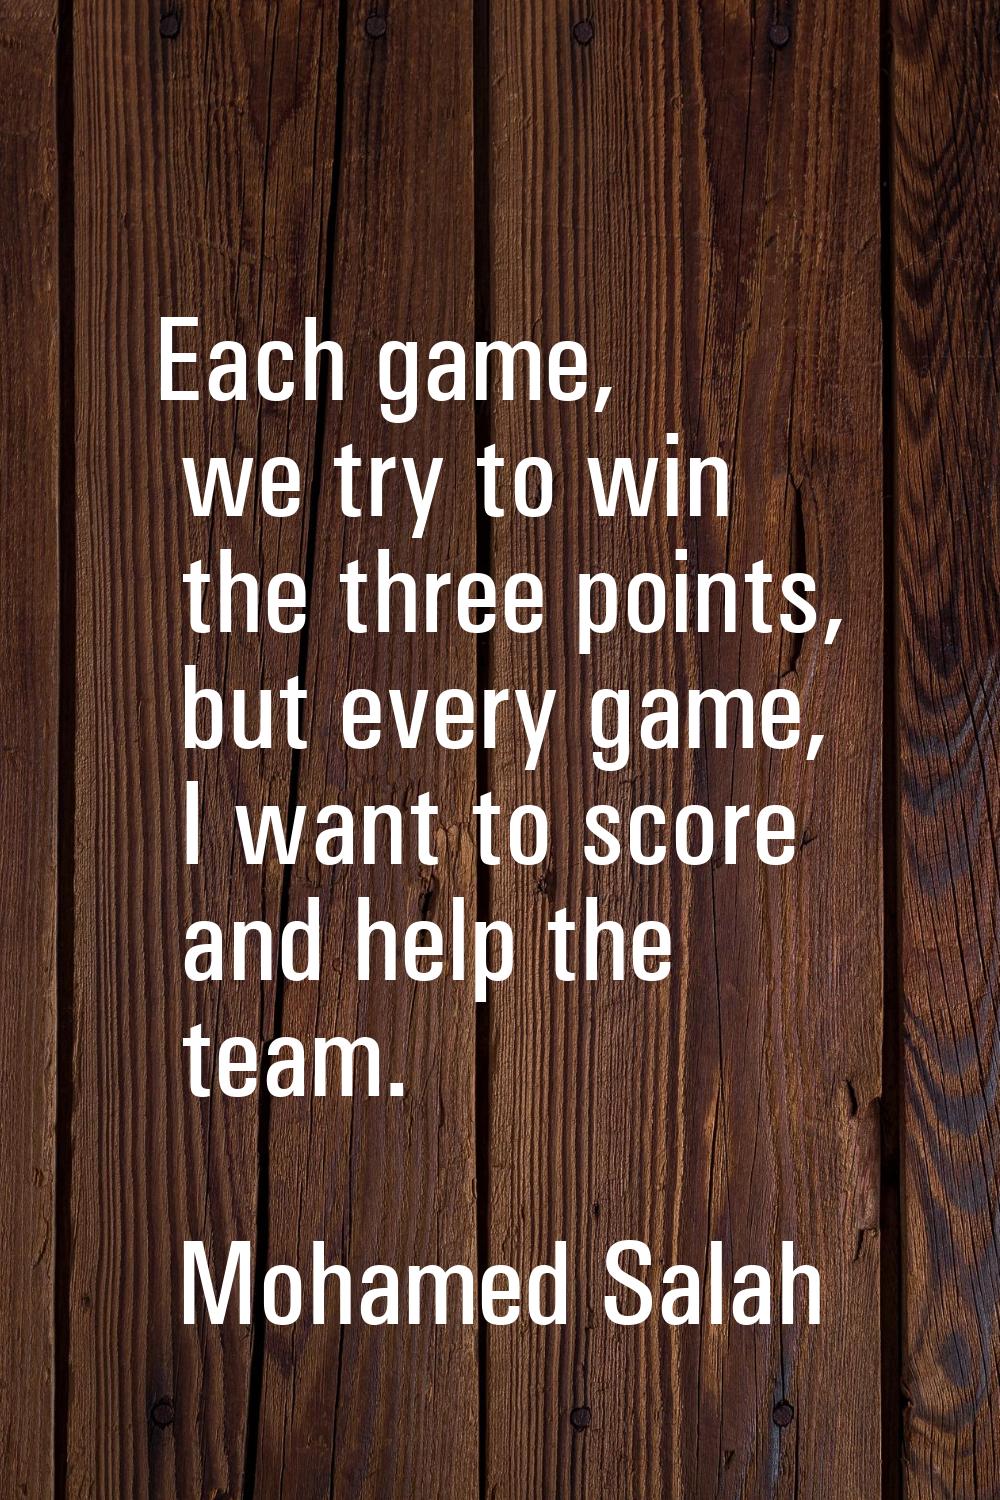 Each game, we try to win the three points, but every game, I want to score and help the team.